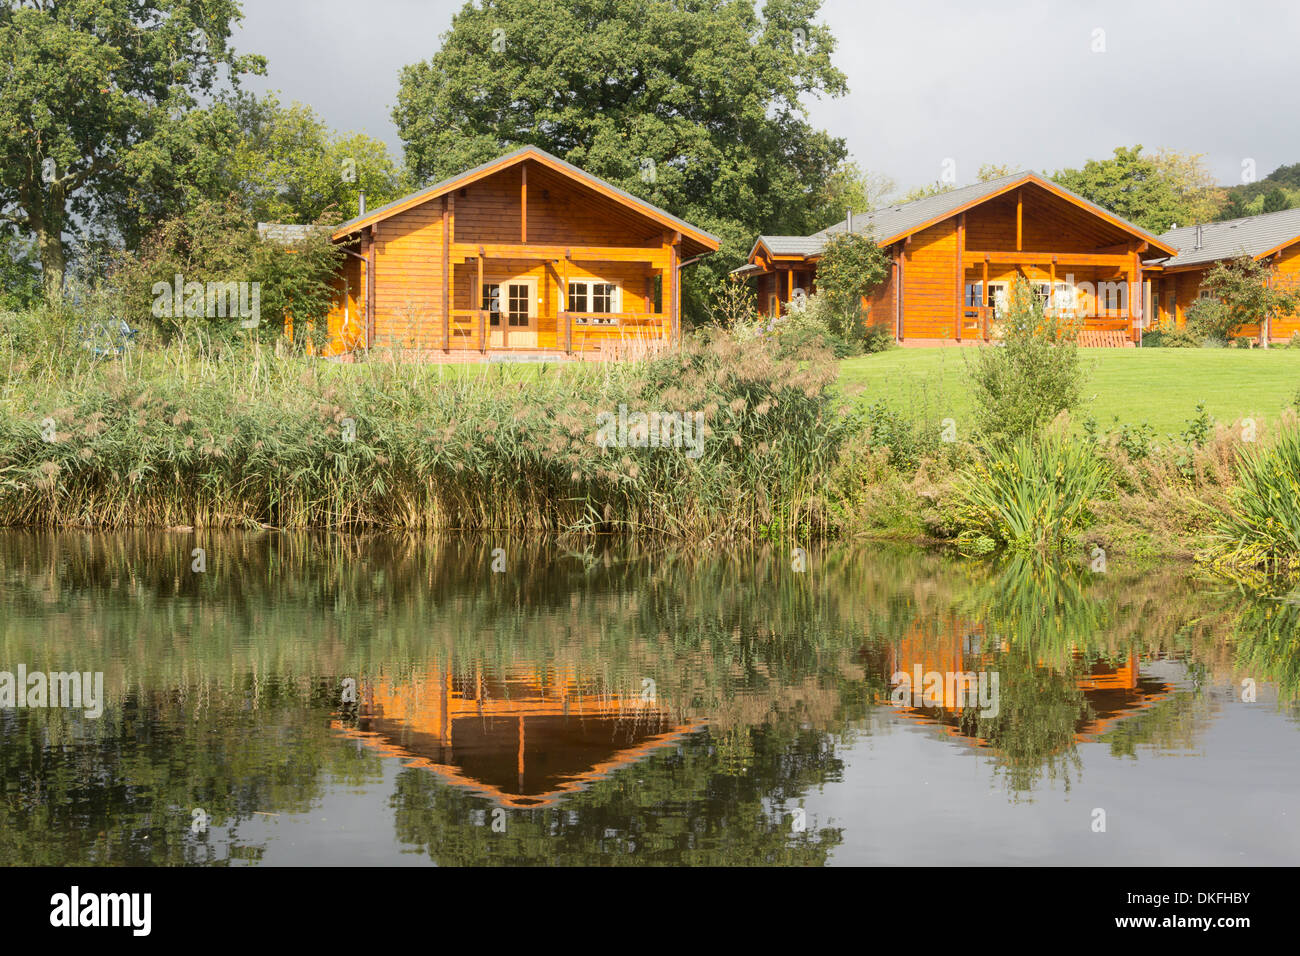 Holiday wooden Scandanavian lodges reflected in the waters of a small lake at Woodside Country Park, Ledbury, Herefordshire Stock Photo